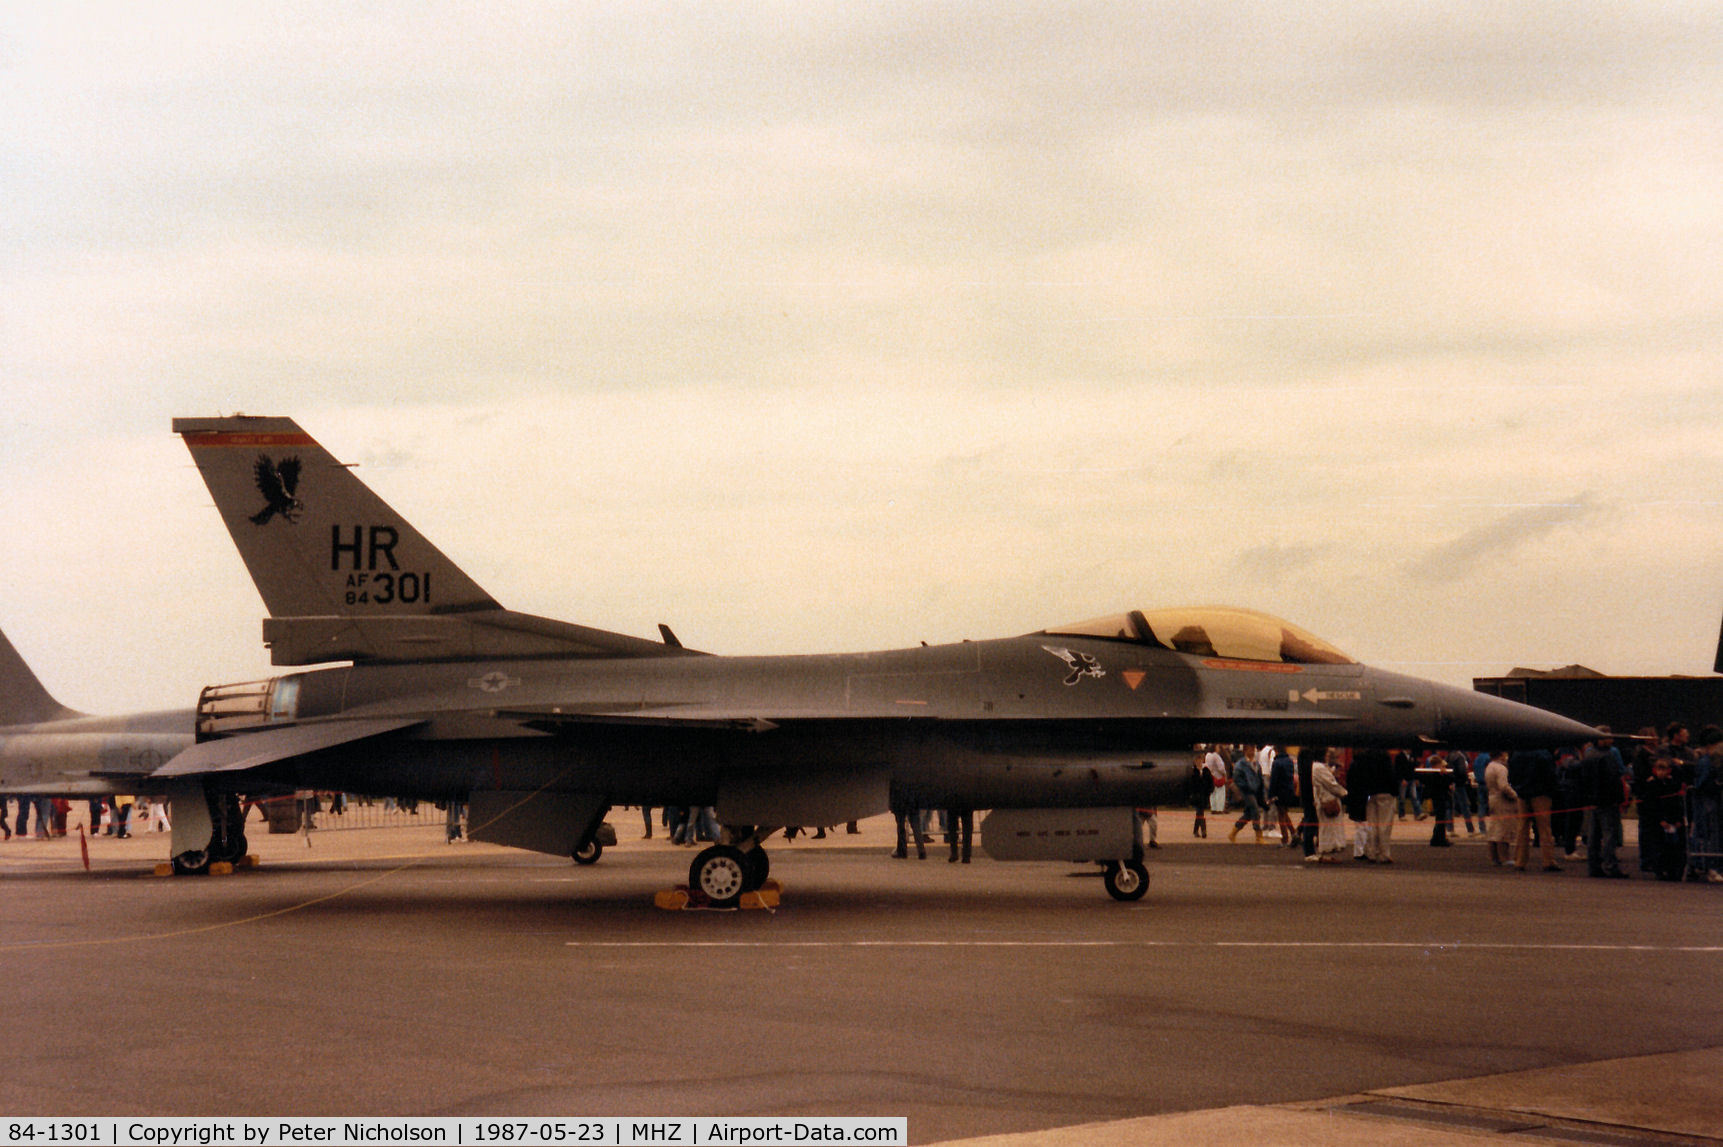 84-1301, 1984 General Dynamics F-16C Fighting Falcon C/N 5C-138, F-16C Fighting Falcon of 313rd Tactical Fighter Squadron/50th Tactical Fighter Wing based at Hahn on display at the 1987 RAF Mildenhall Air Fete.